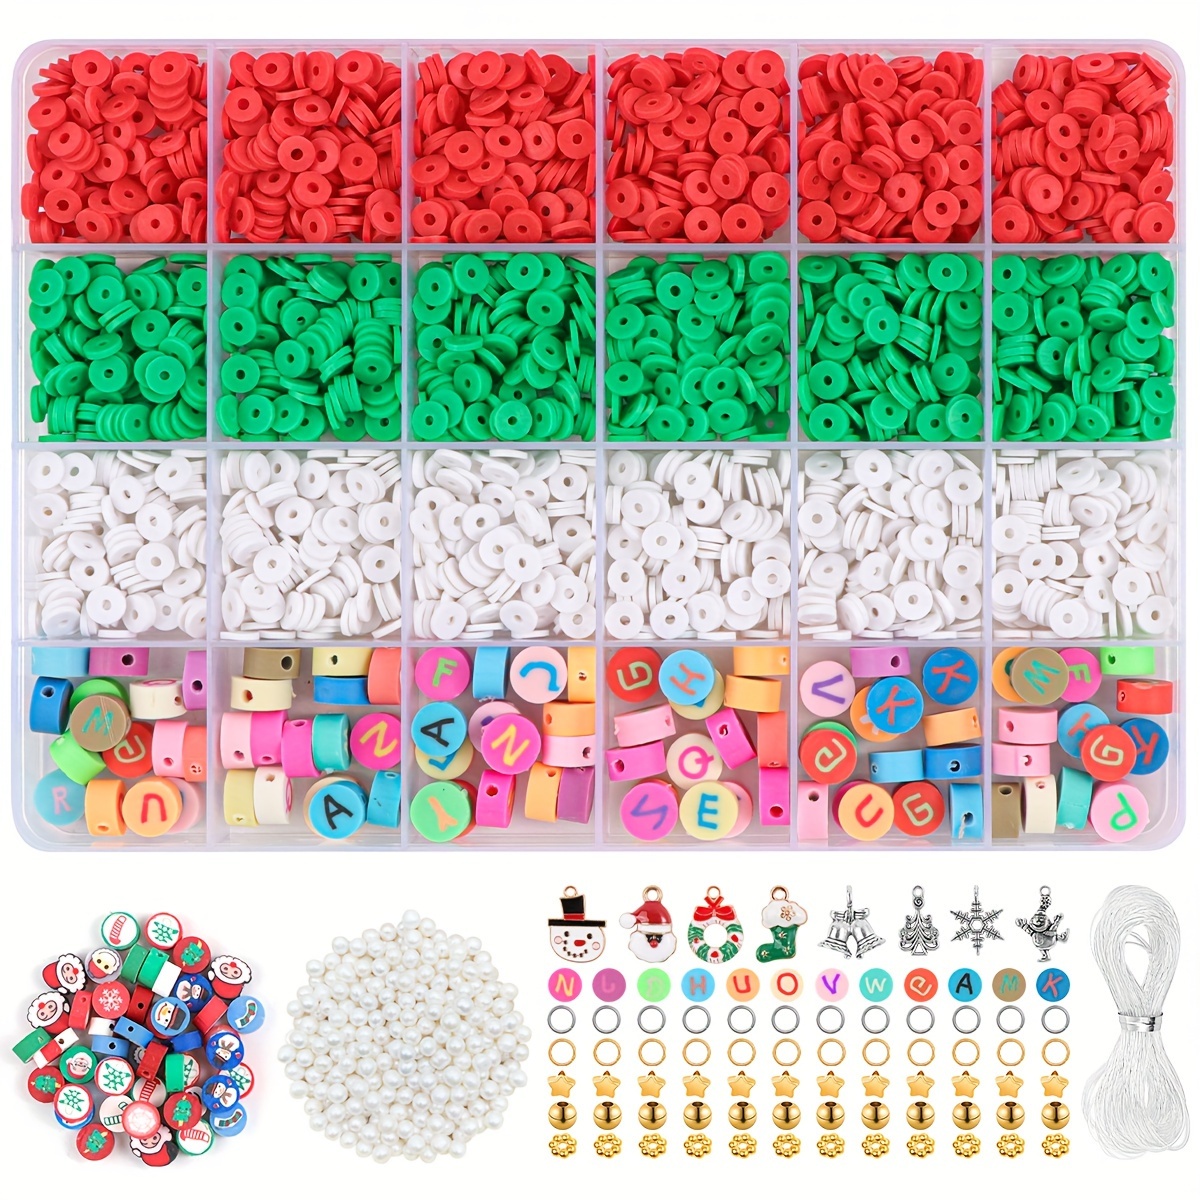 3300pcs Polymer Clay Beads For Jewelry Making, Valentine'S Day,Necklace Bracelet  Making Kit For Adults Crafts Gifts